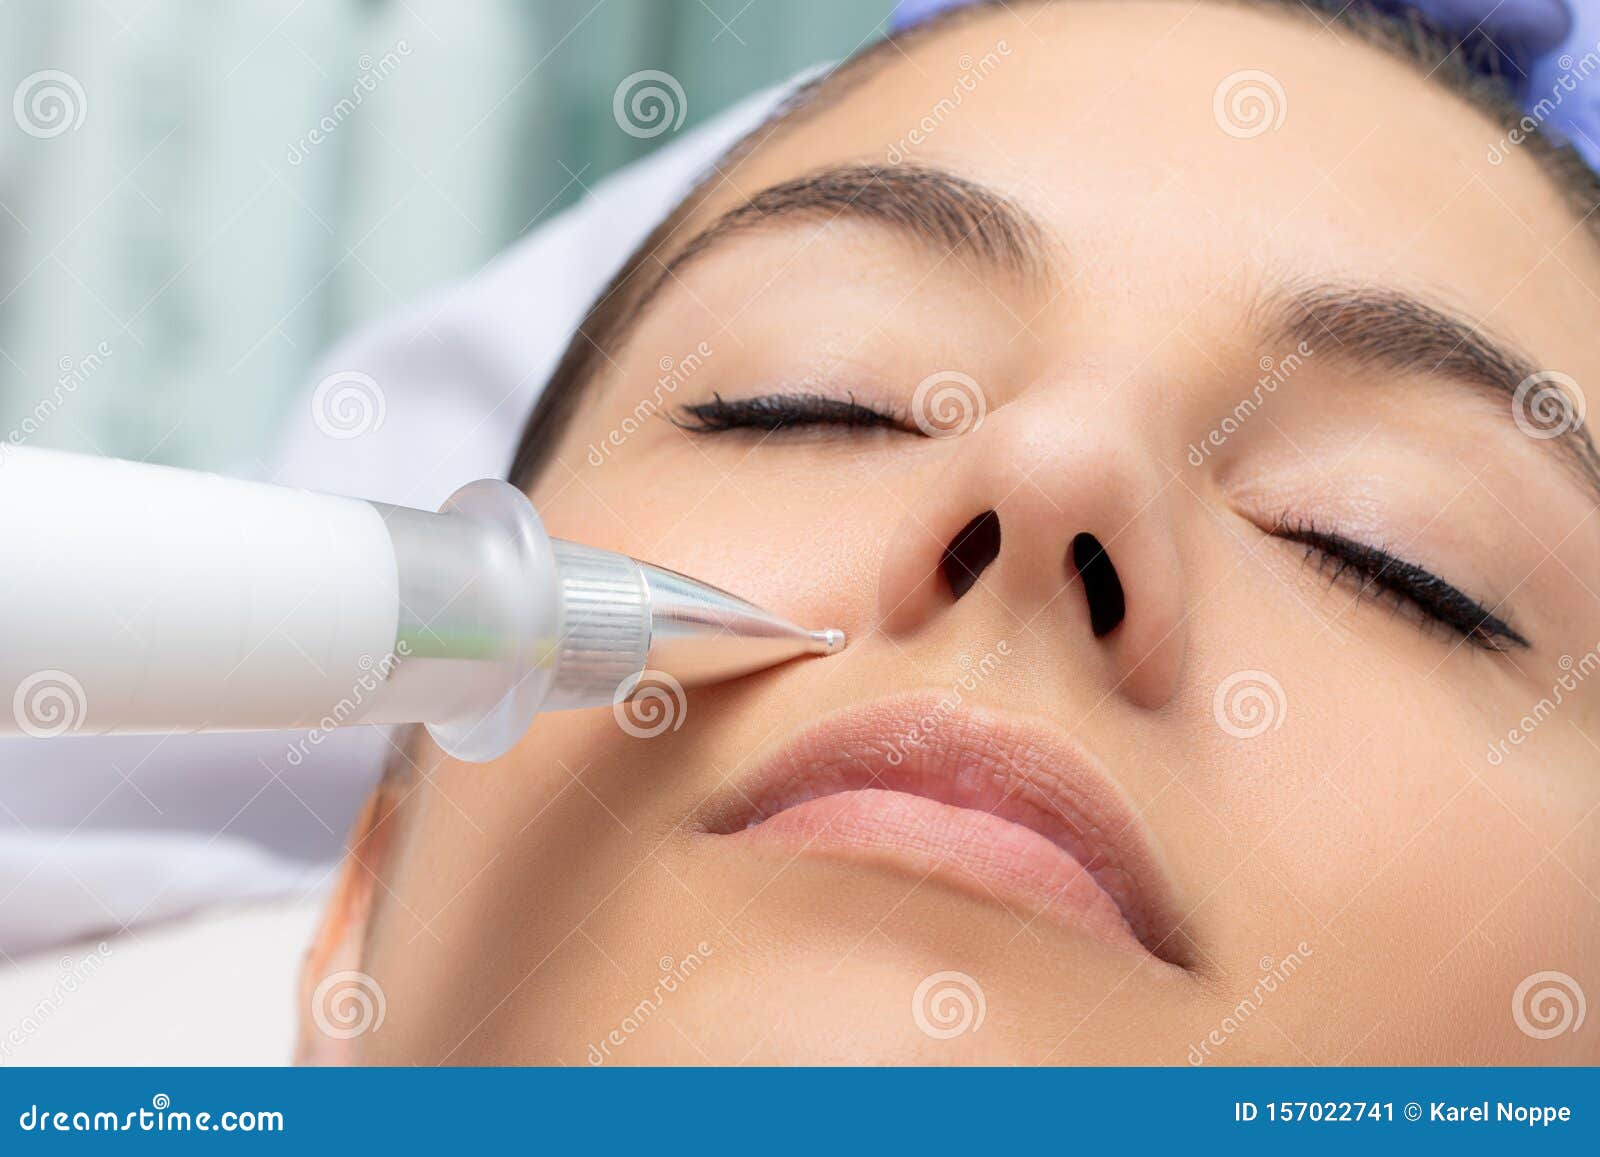 cosmetic laser pen reducing wrinkles on female face